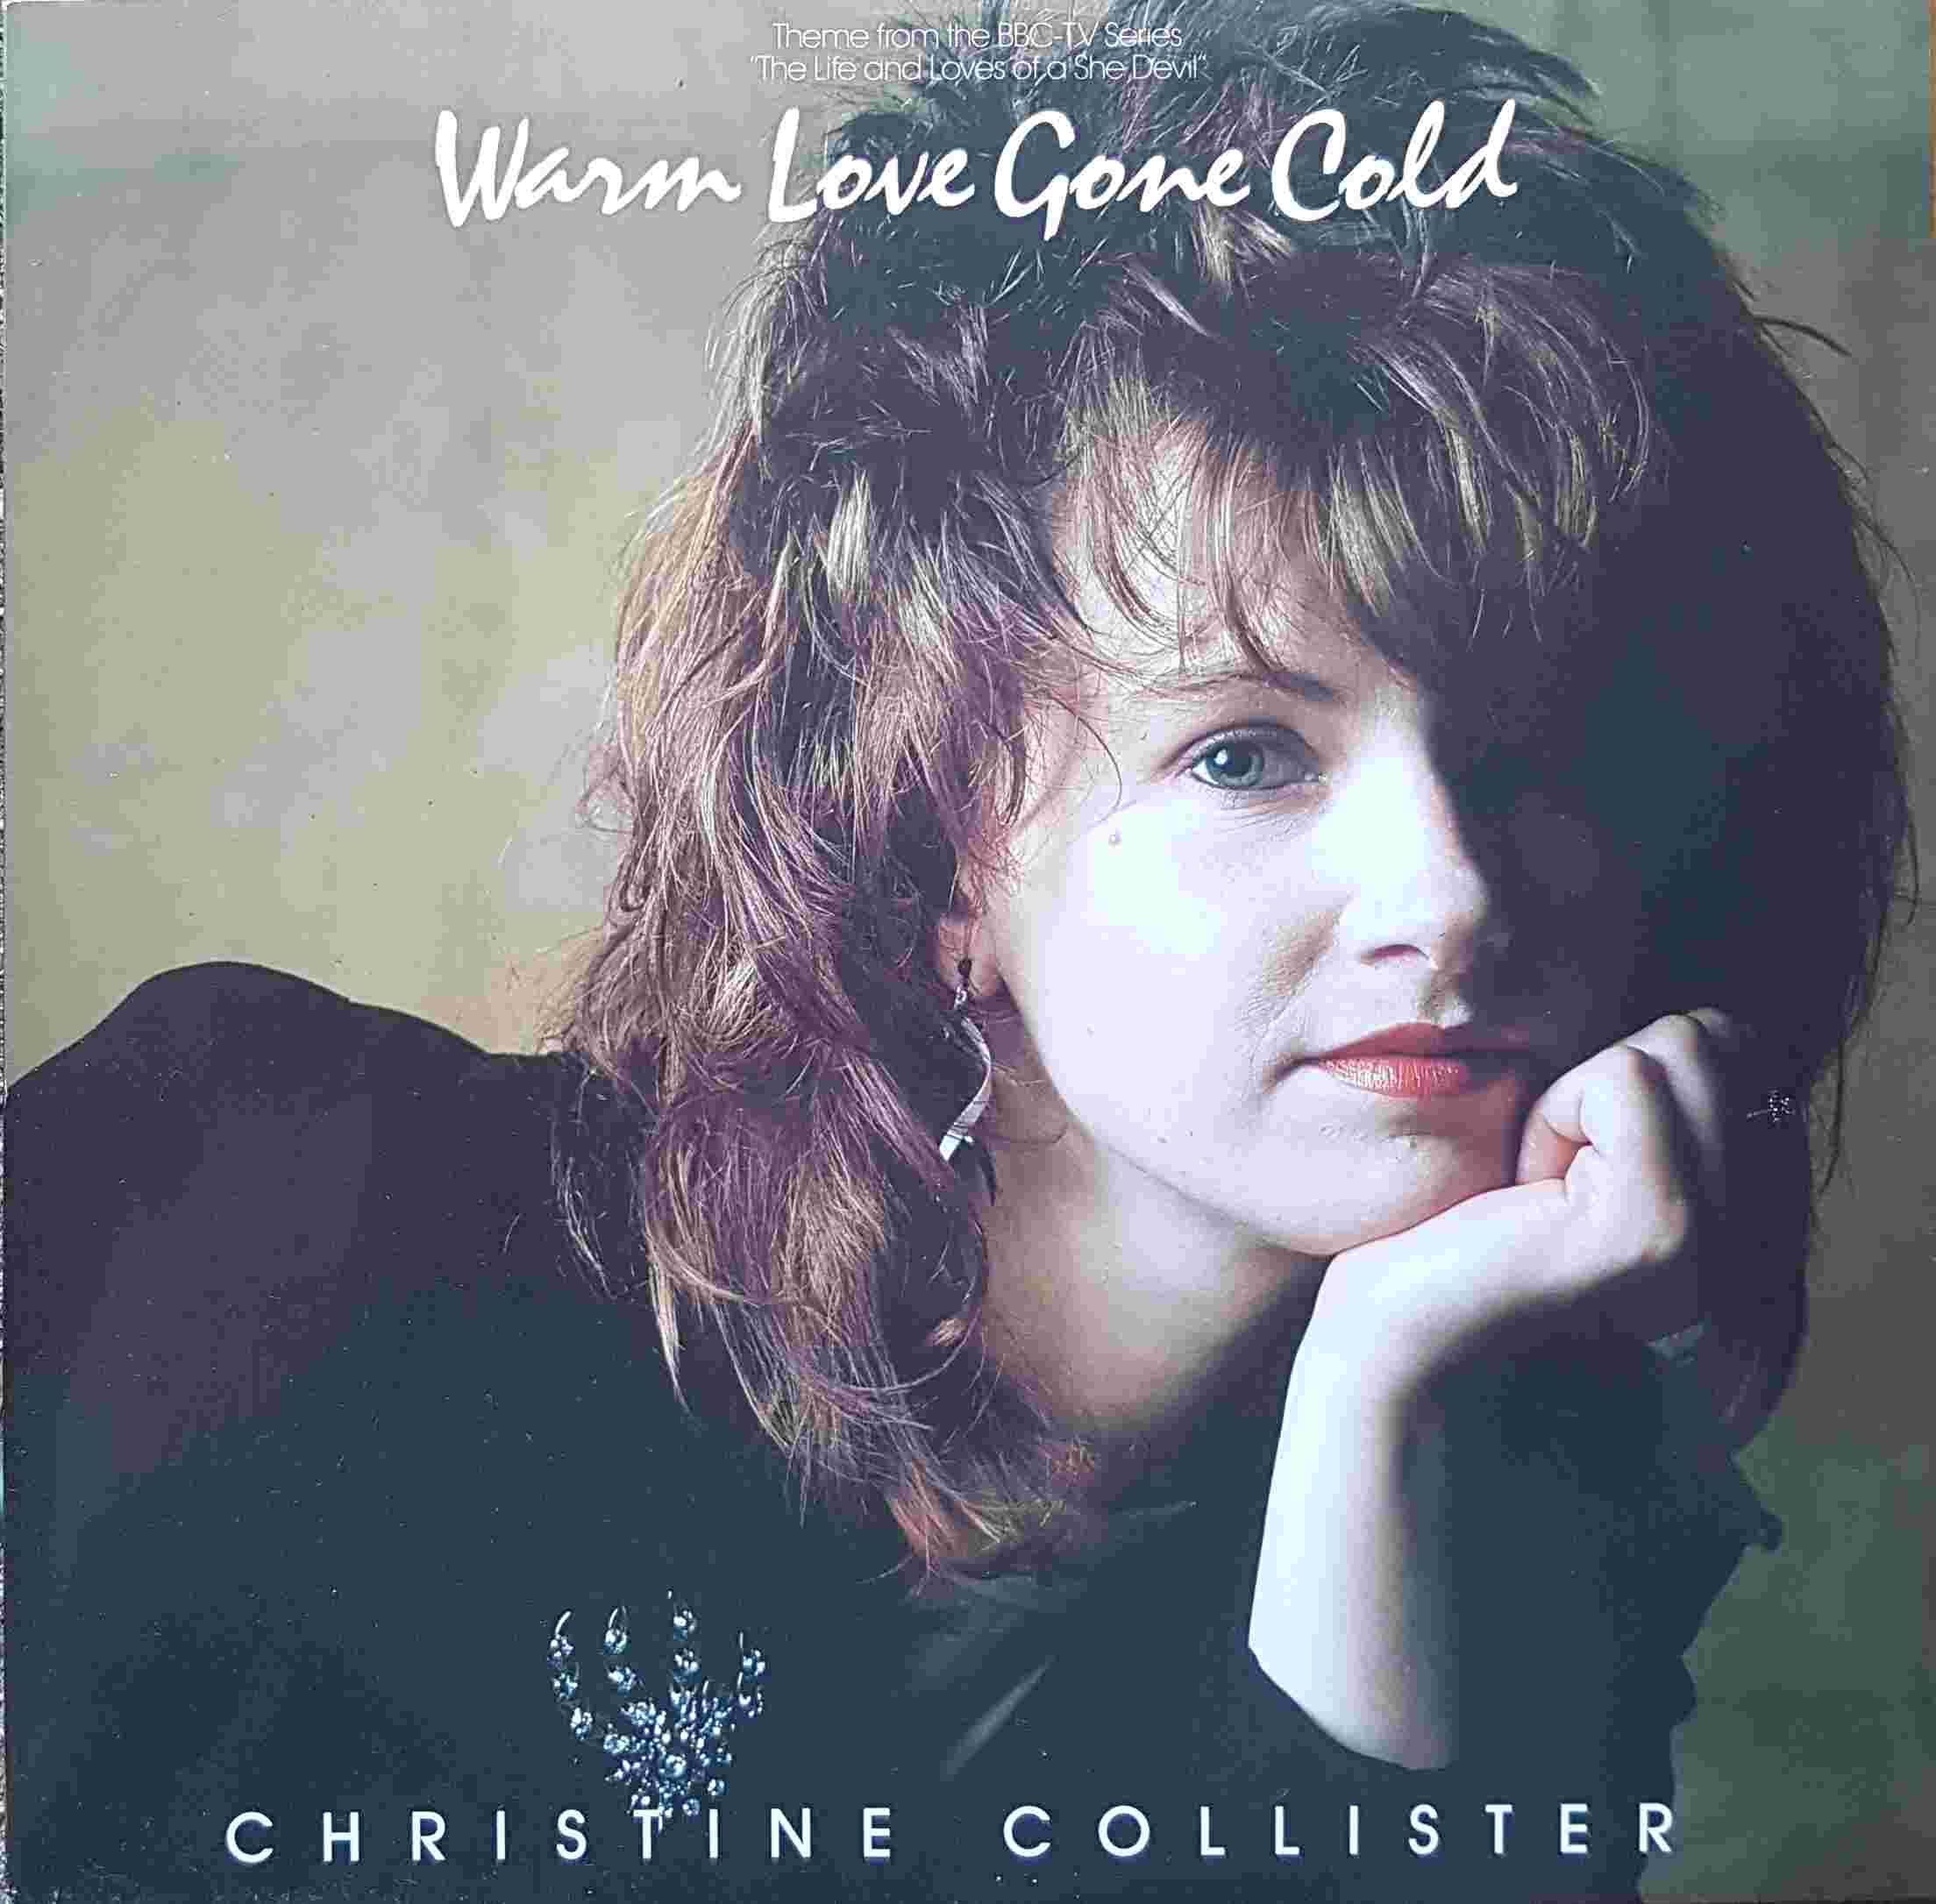 Picture of 12 RSL 199 Warm loves gone cold (Life and loves of a she devil) by artist Filleul / Mozart / Egre / Christine Collister from the BBC 12inches - Records and Tapes library